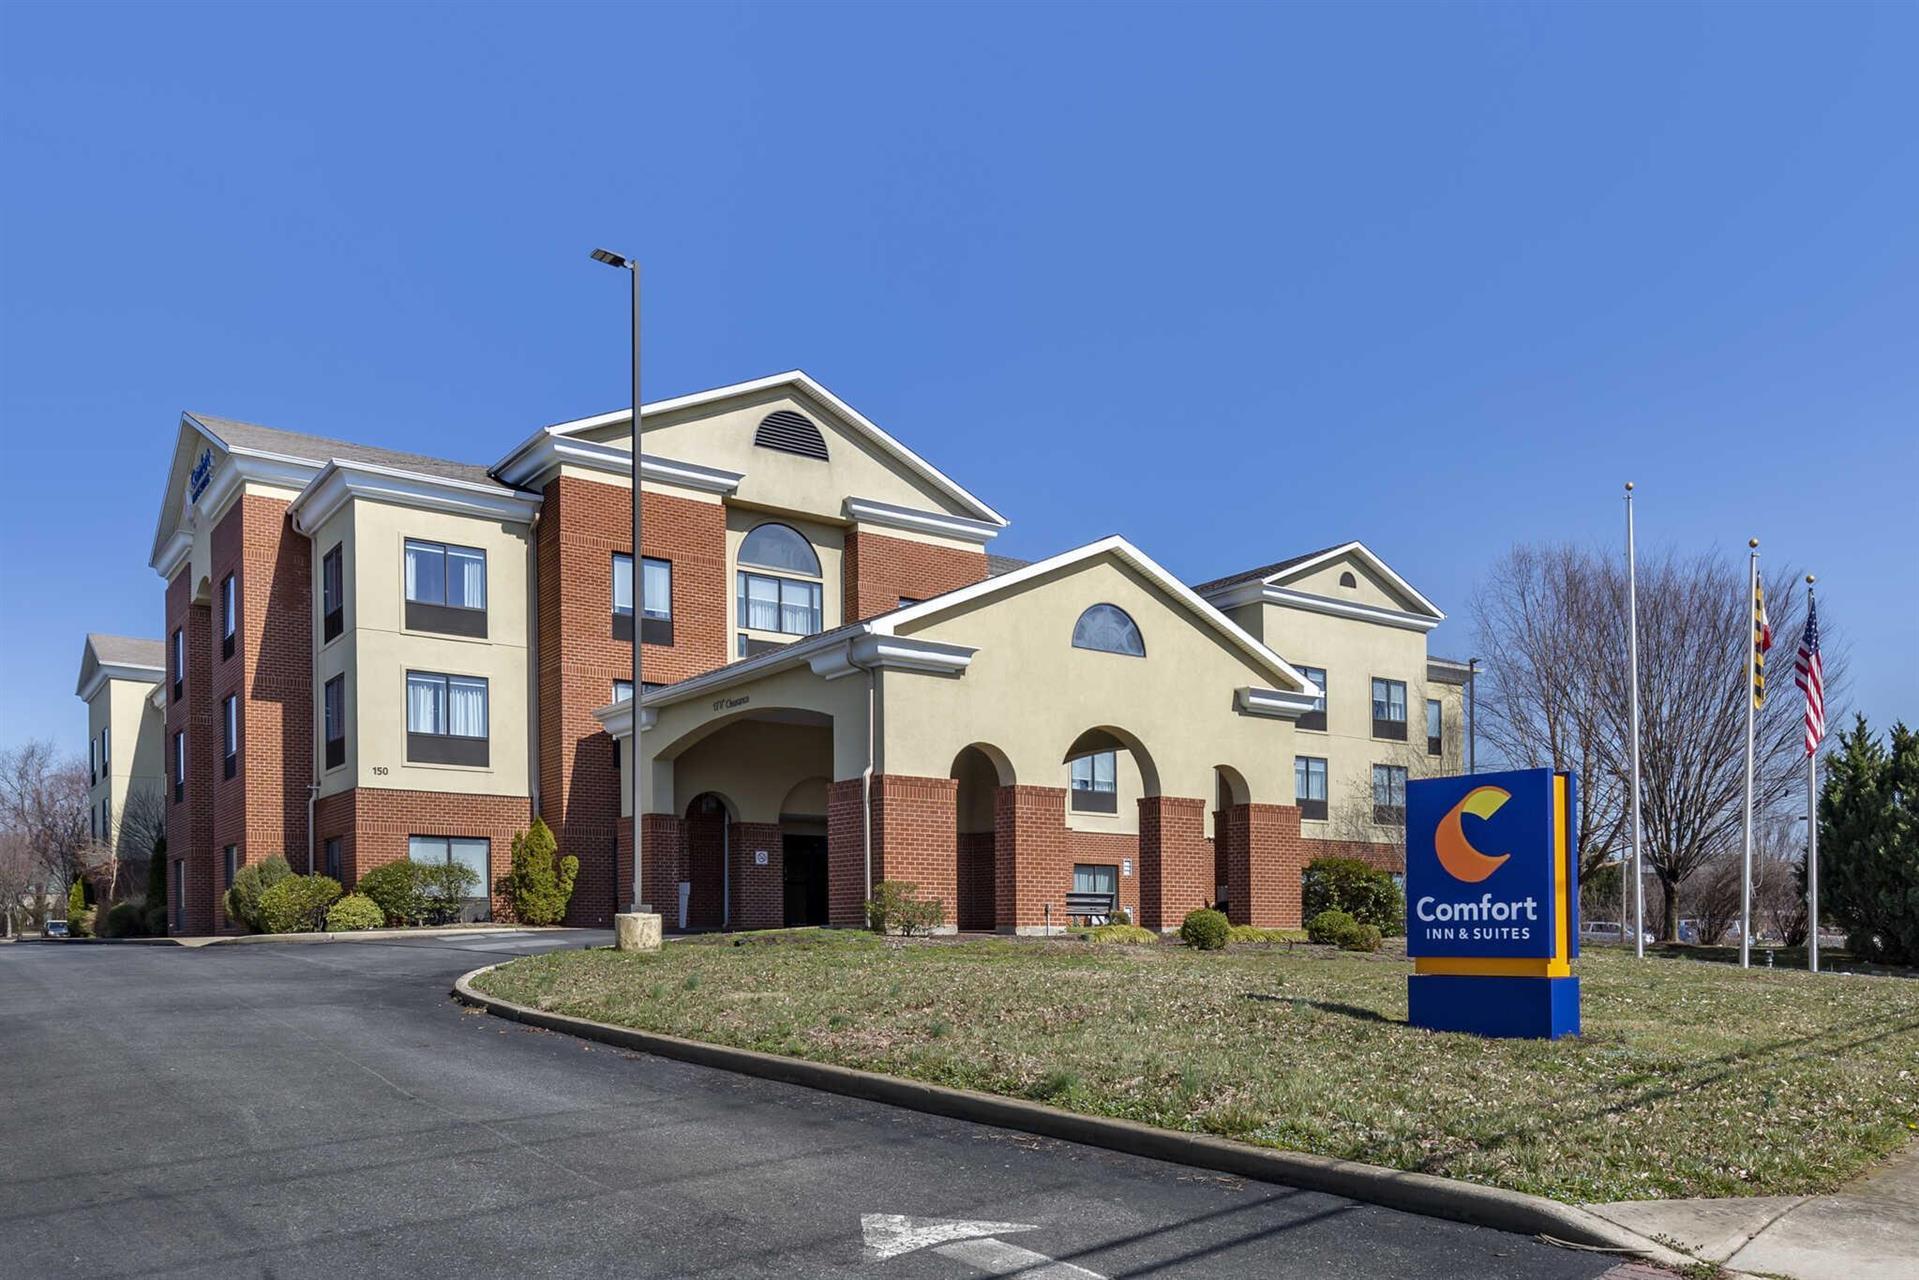 Comfort Inn & Suites Chestertown in Chestertown, MD